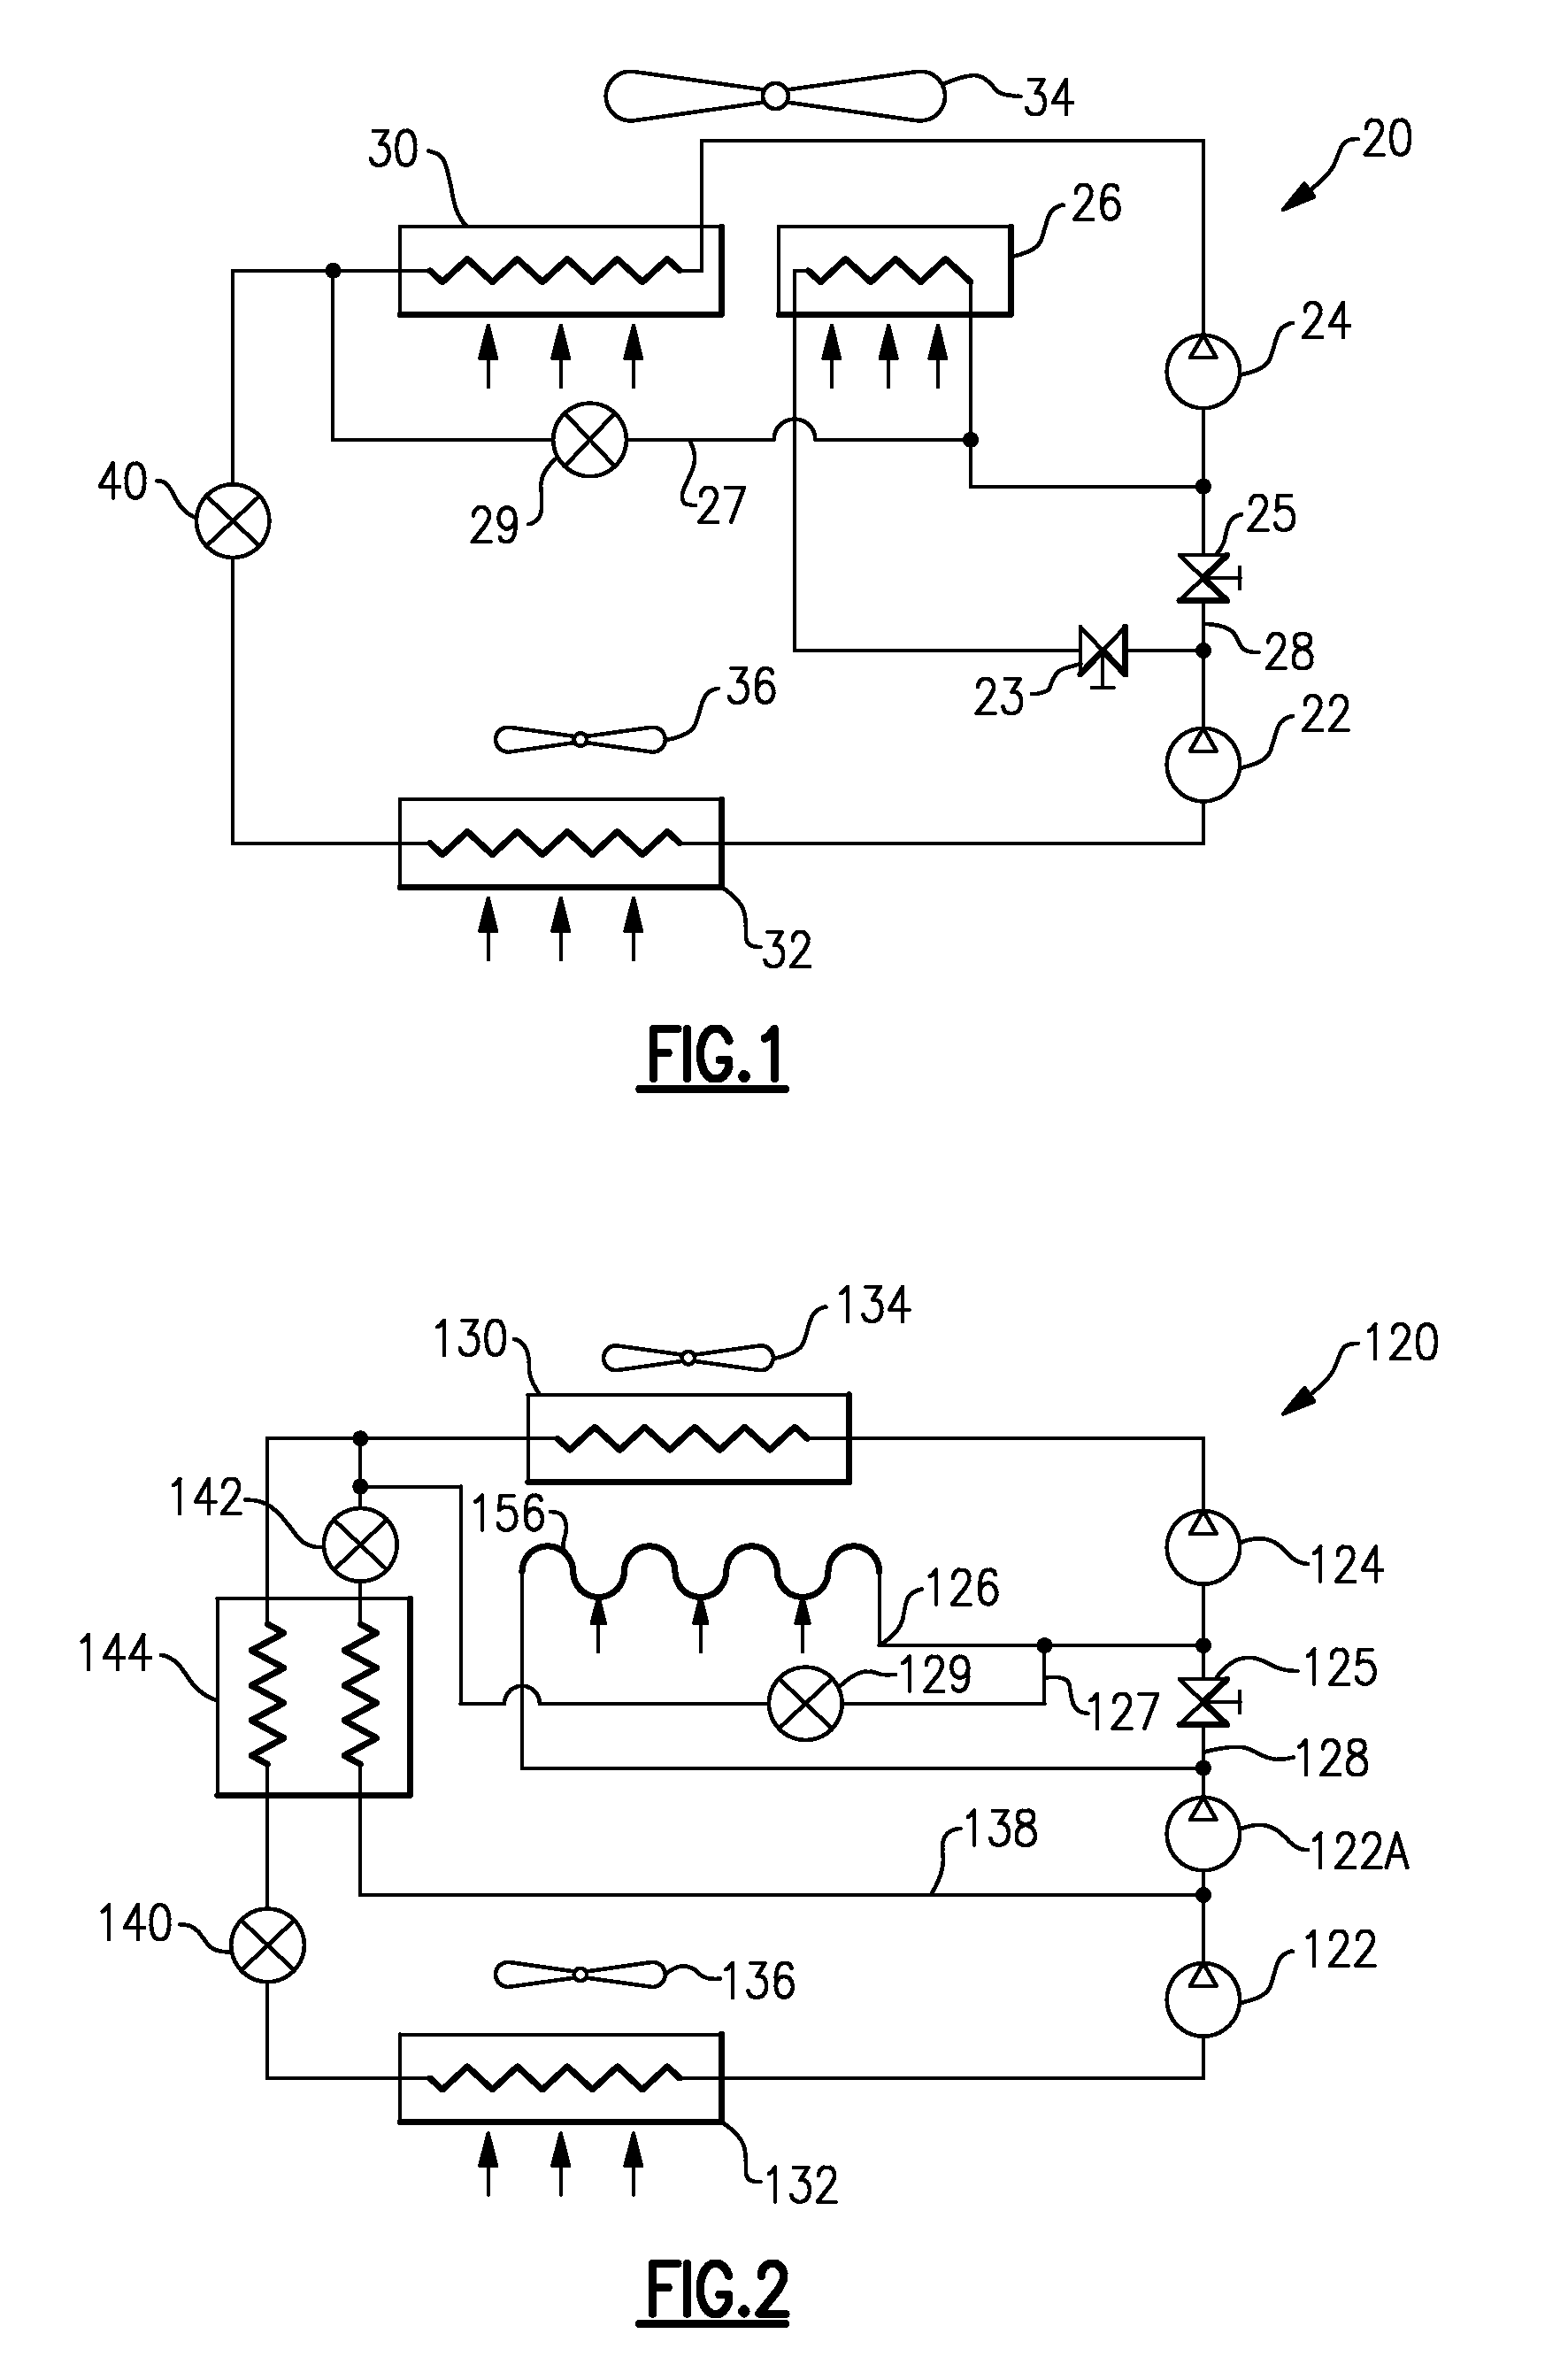 Refrigerant system with intercooler and liquid/vapor injection